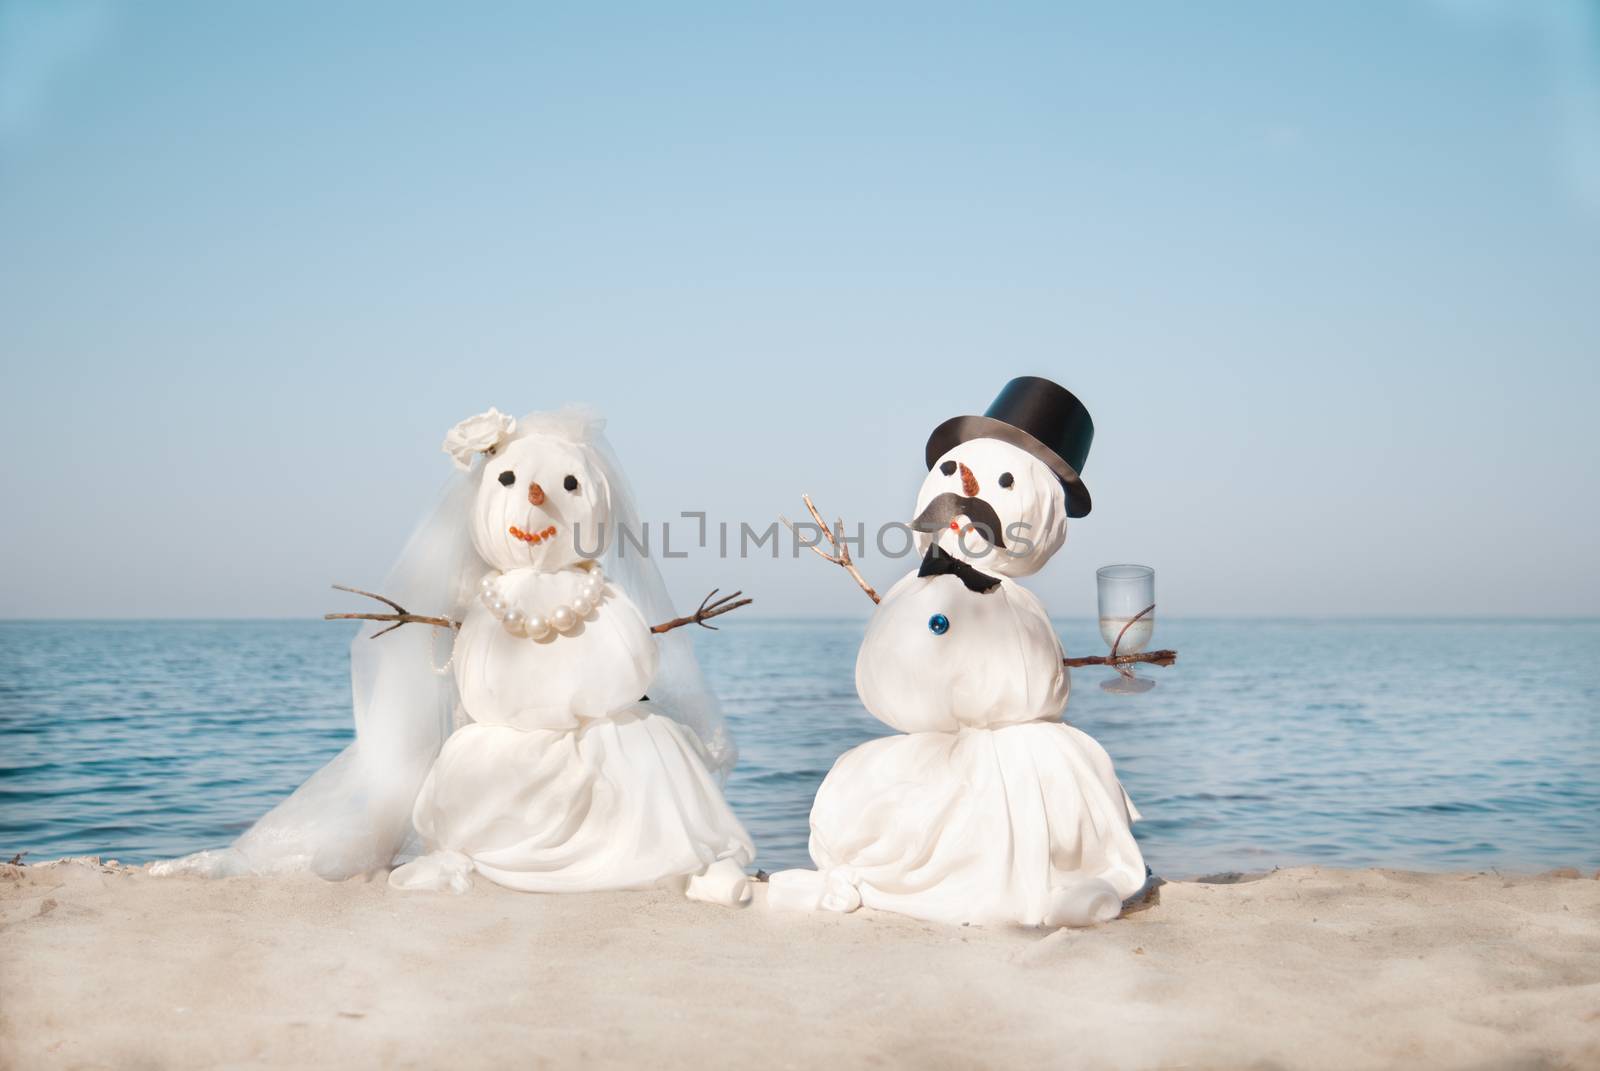 Two Snowmen - A lovely couple at the sea